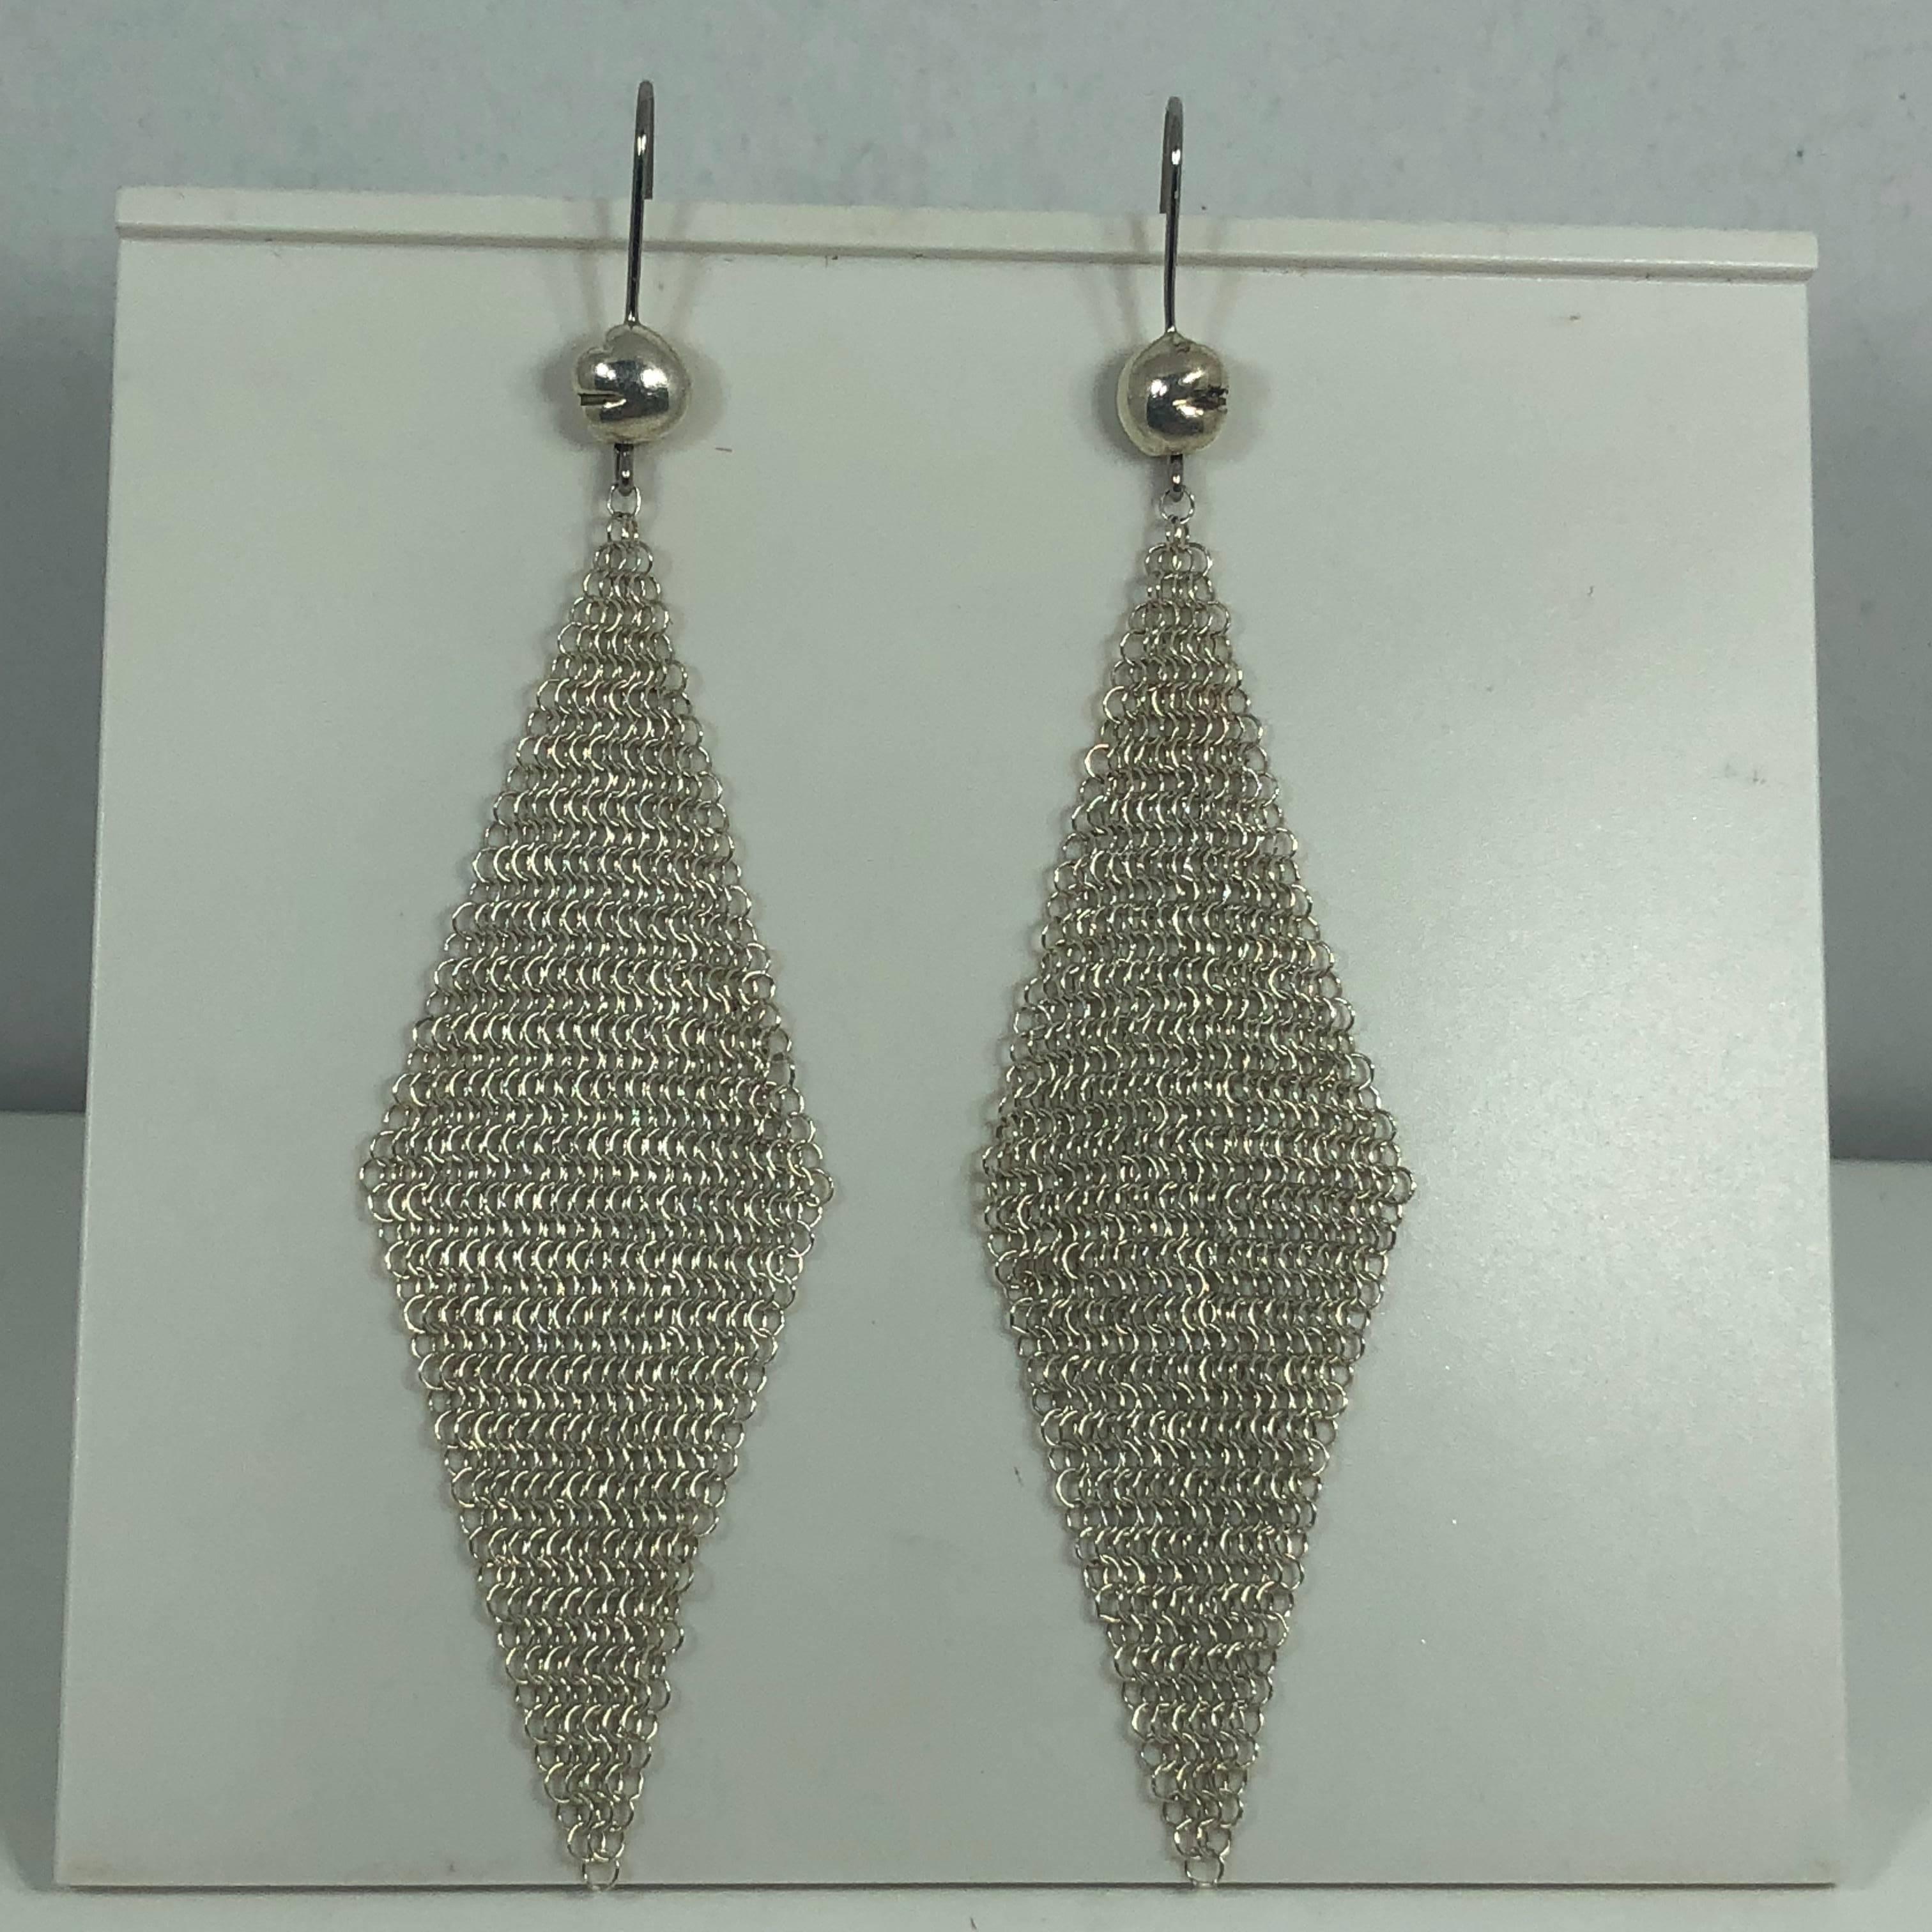 Tiffany & Co Elsa Peretti Sterling Silver mesh handkerchief earrings. Elsa Peretti for Tiffany & Co, original design. This earring is created in 925 sterling silver and weigh 4.1 grams collectively. Fluid Mesh design hang beautifully. Approx. 4